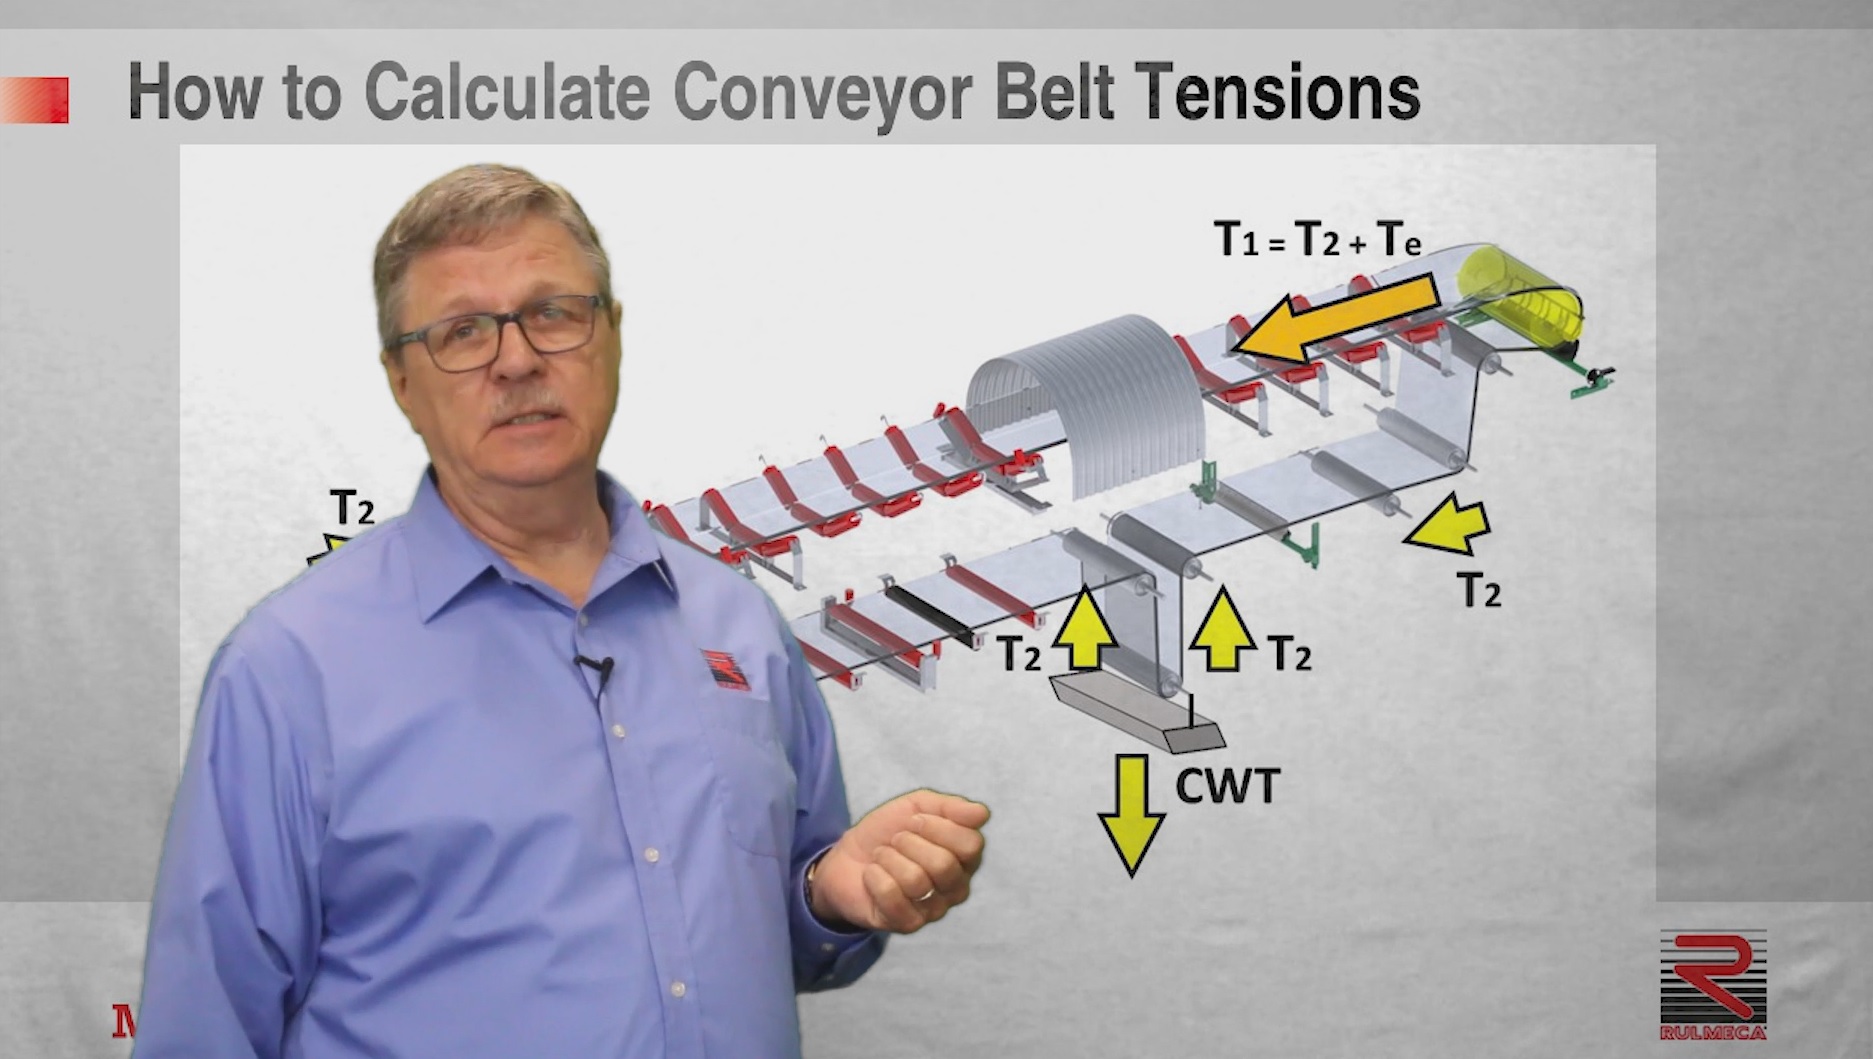 Mike Gawinski explains how to calculate belt tensions